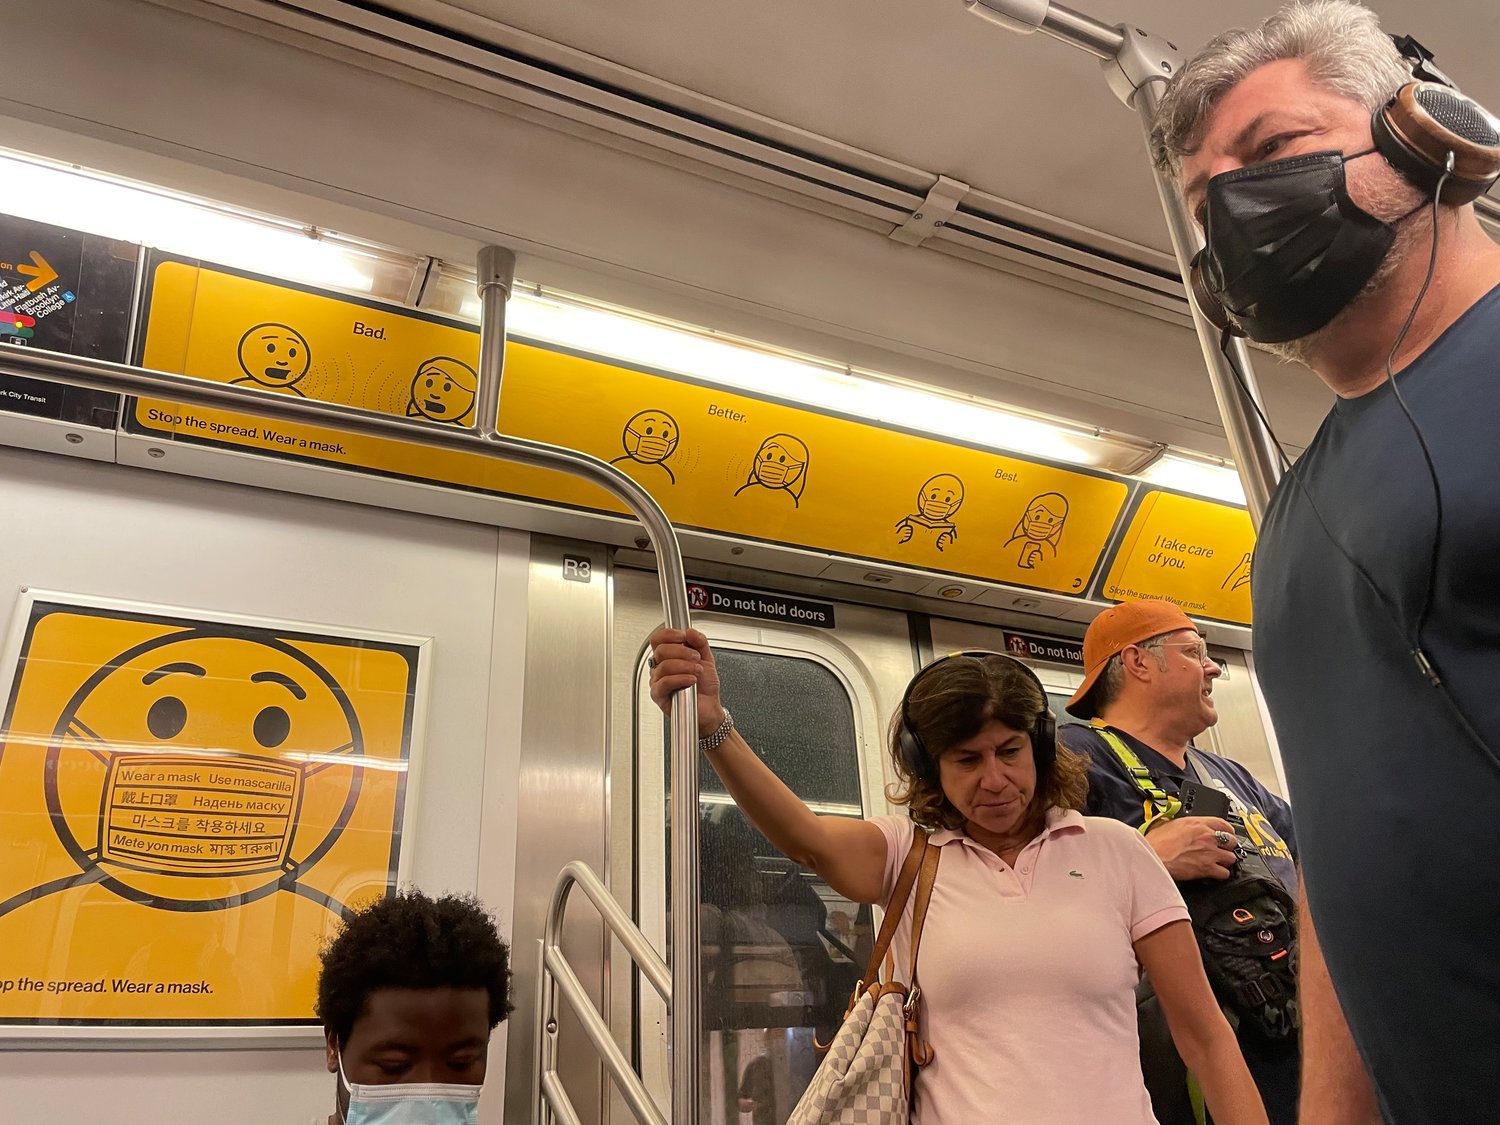 According to the latest MTA subway and bus mask-compliance statistics, just 64 percent of subway passengers wore masks correctly in April, the lowest since the agency started keeping tabs in July 2020. Nearly a quarter of subway riders wore no mask at all. And despite elevated Covid numbers and the appearance of new variants, the agency announced that as of June 7 unvaccinated workers would no longer be required to take weekly Covid tests.